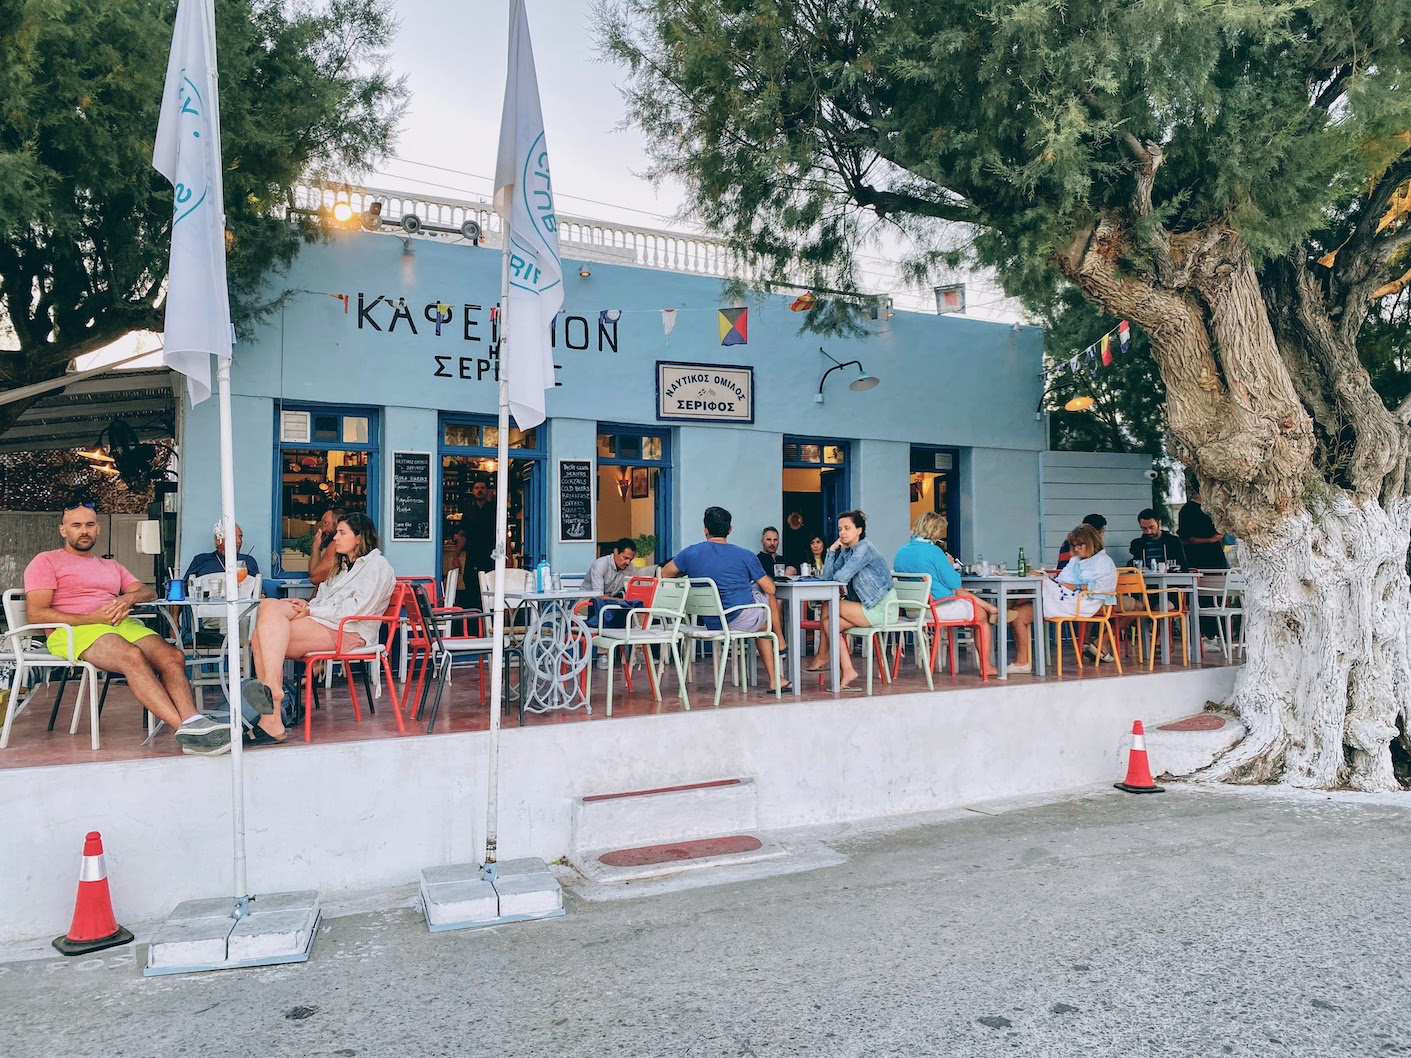 Serifos: the cool kids hang out at the Yacht Club